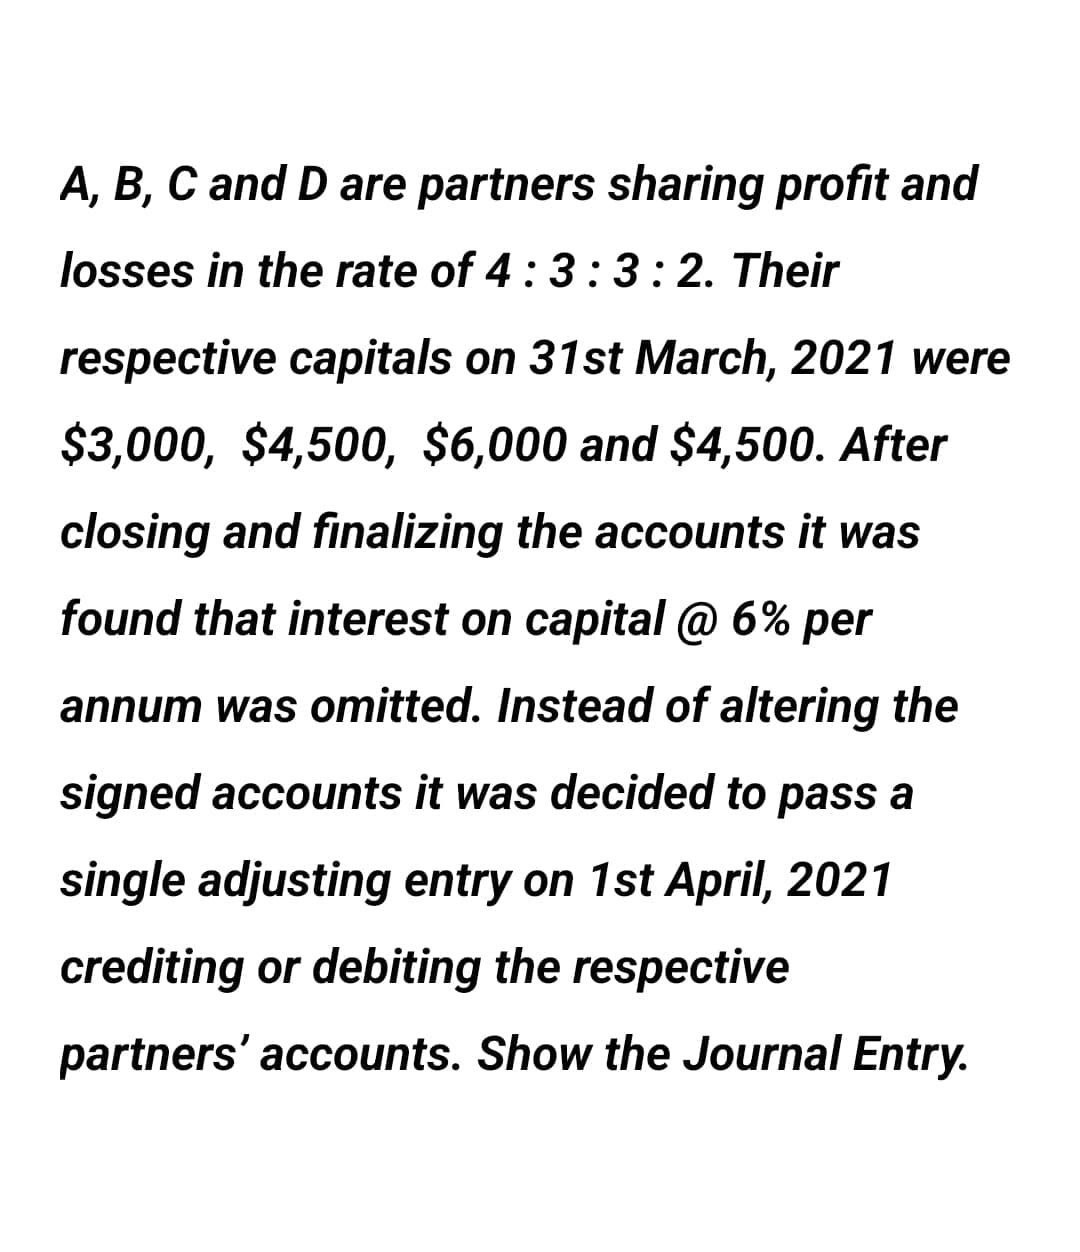 A, B, C and D are partners sharing profit and
losses in the rate of 4:3 :3:2. Their
respective capitals on 31st March, 2021 were
$3,000, $4,500, $6,000 and $4,500. After
closing and finalizing the accounts it was
found that interest on capital @ 6% per
annum was omitted. Instead of altering the
signed accounts it was decided to pass a
single adjusting entry on 1st April, 2021
crediting or debiting the respective
partners' accounts. Show the Journal Entry.